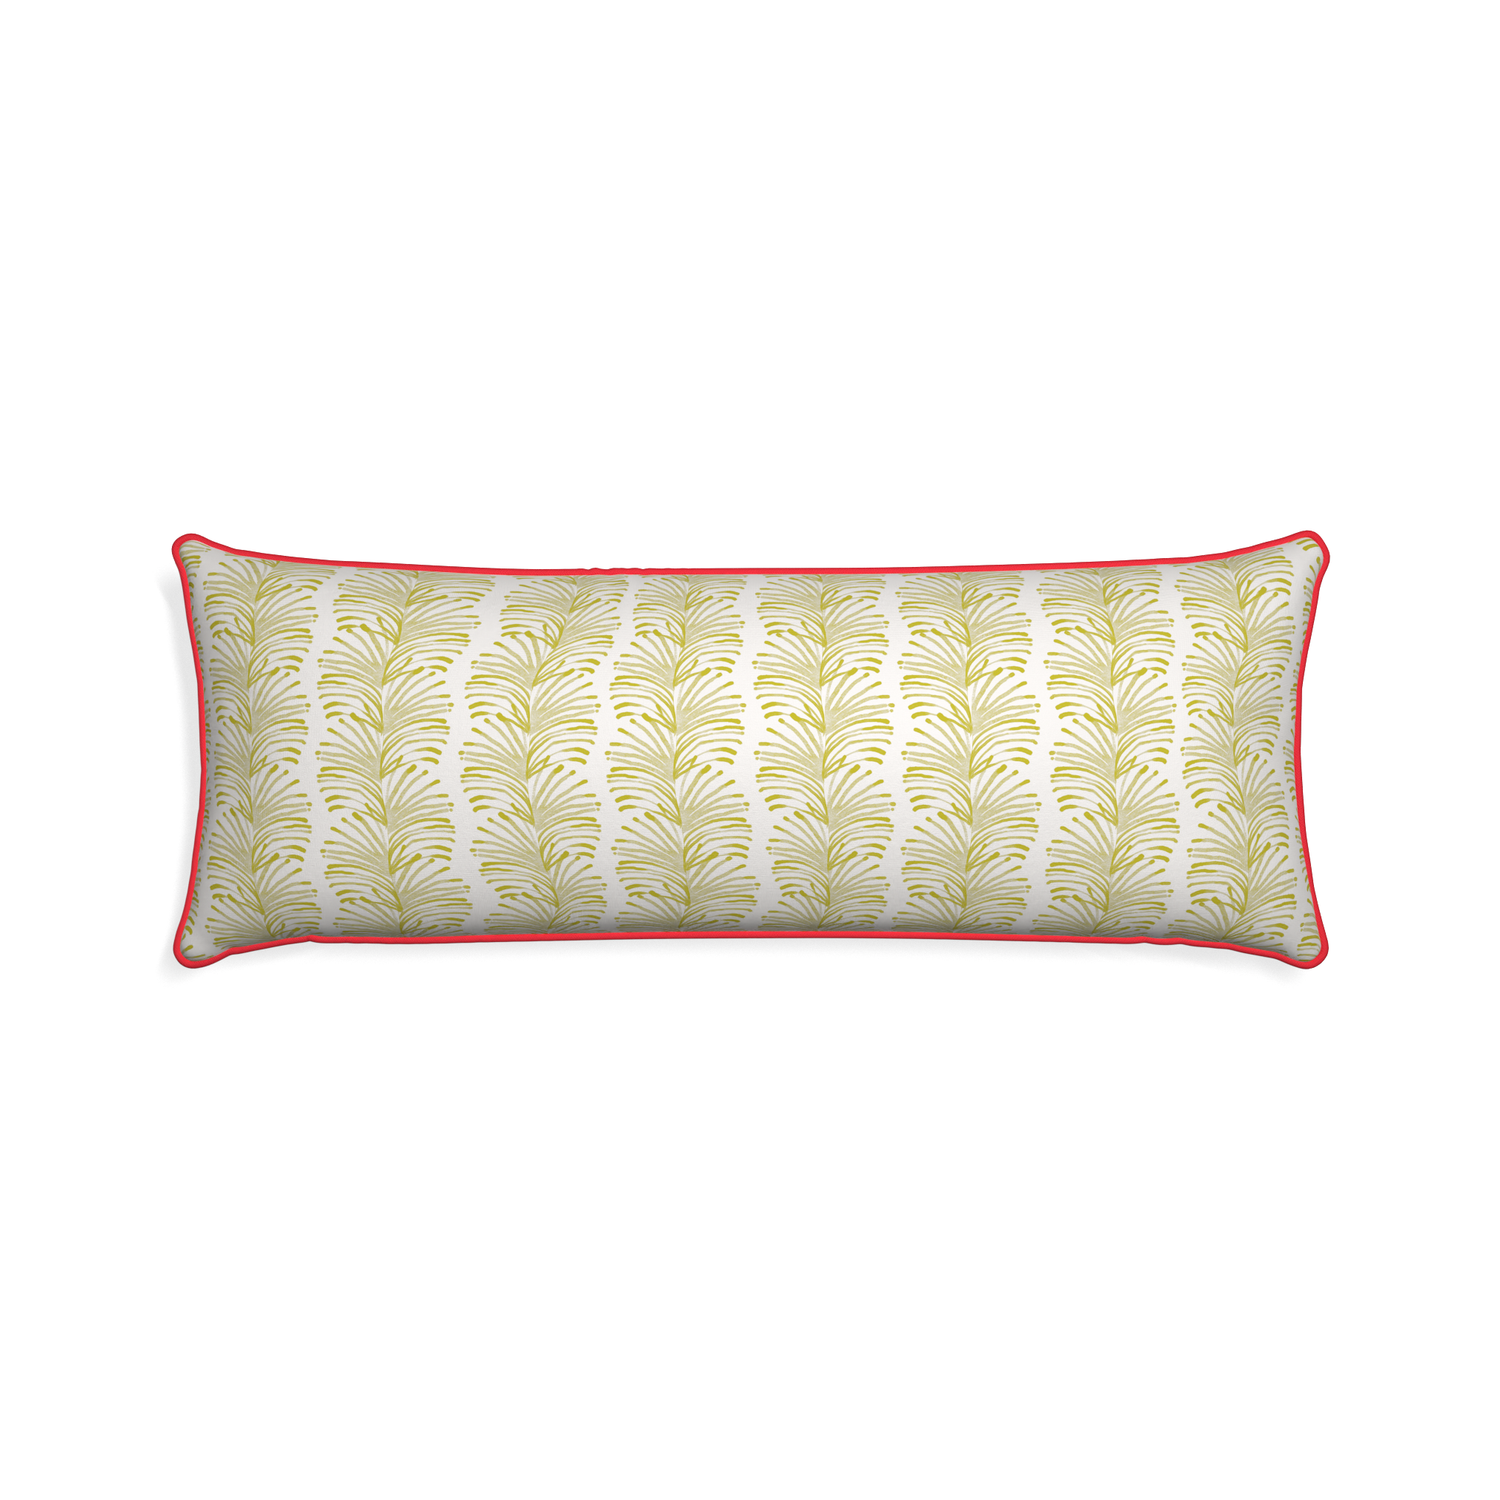 Xl-lumbar emma chartreuse custom yellow stripe chartreusepillow with cherry piping on white background